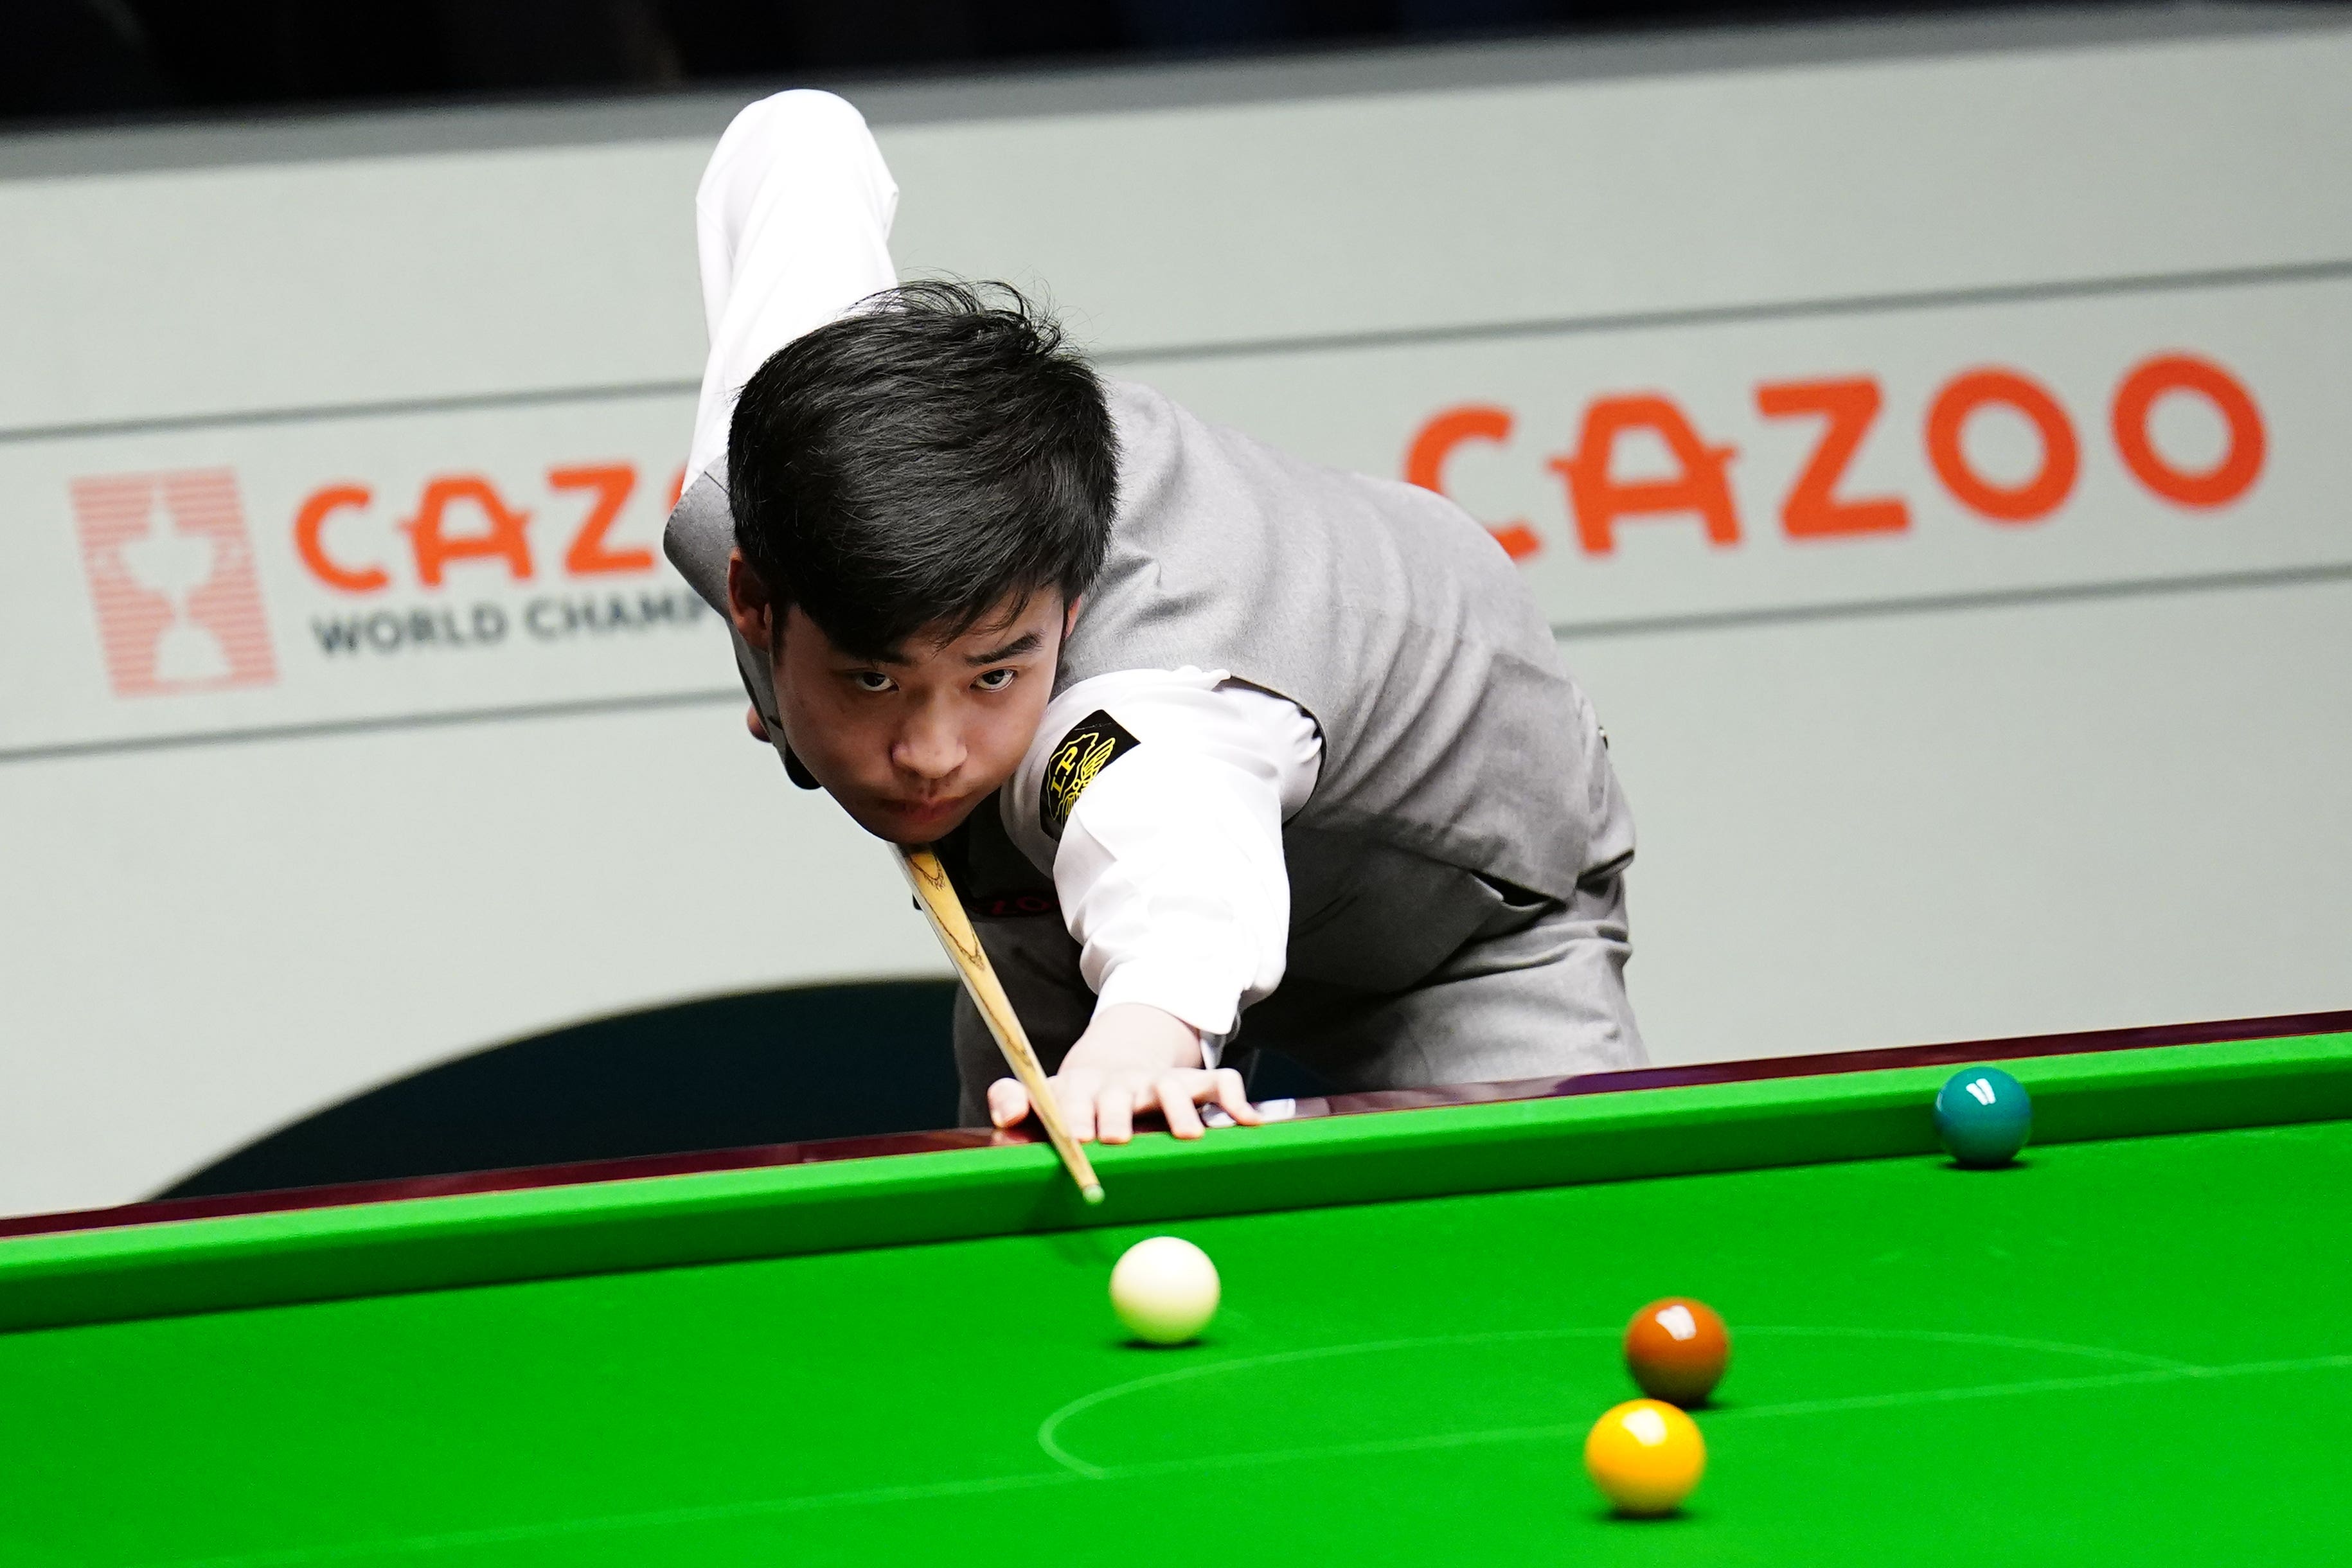 World Snooker Championship Si Jiahui leads Luca Brecel after opening session The Independent